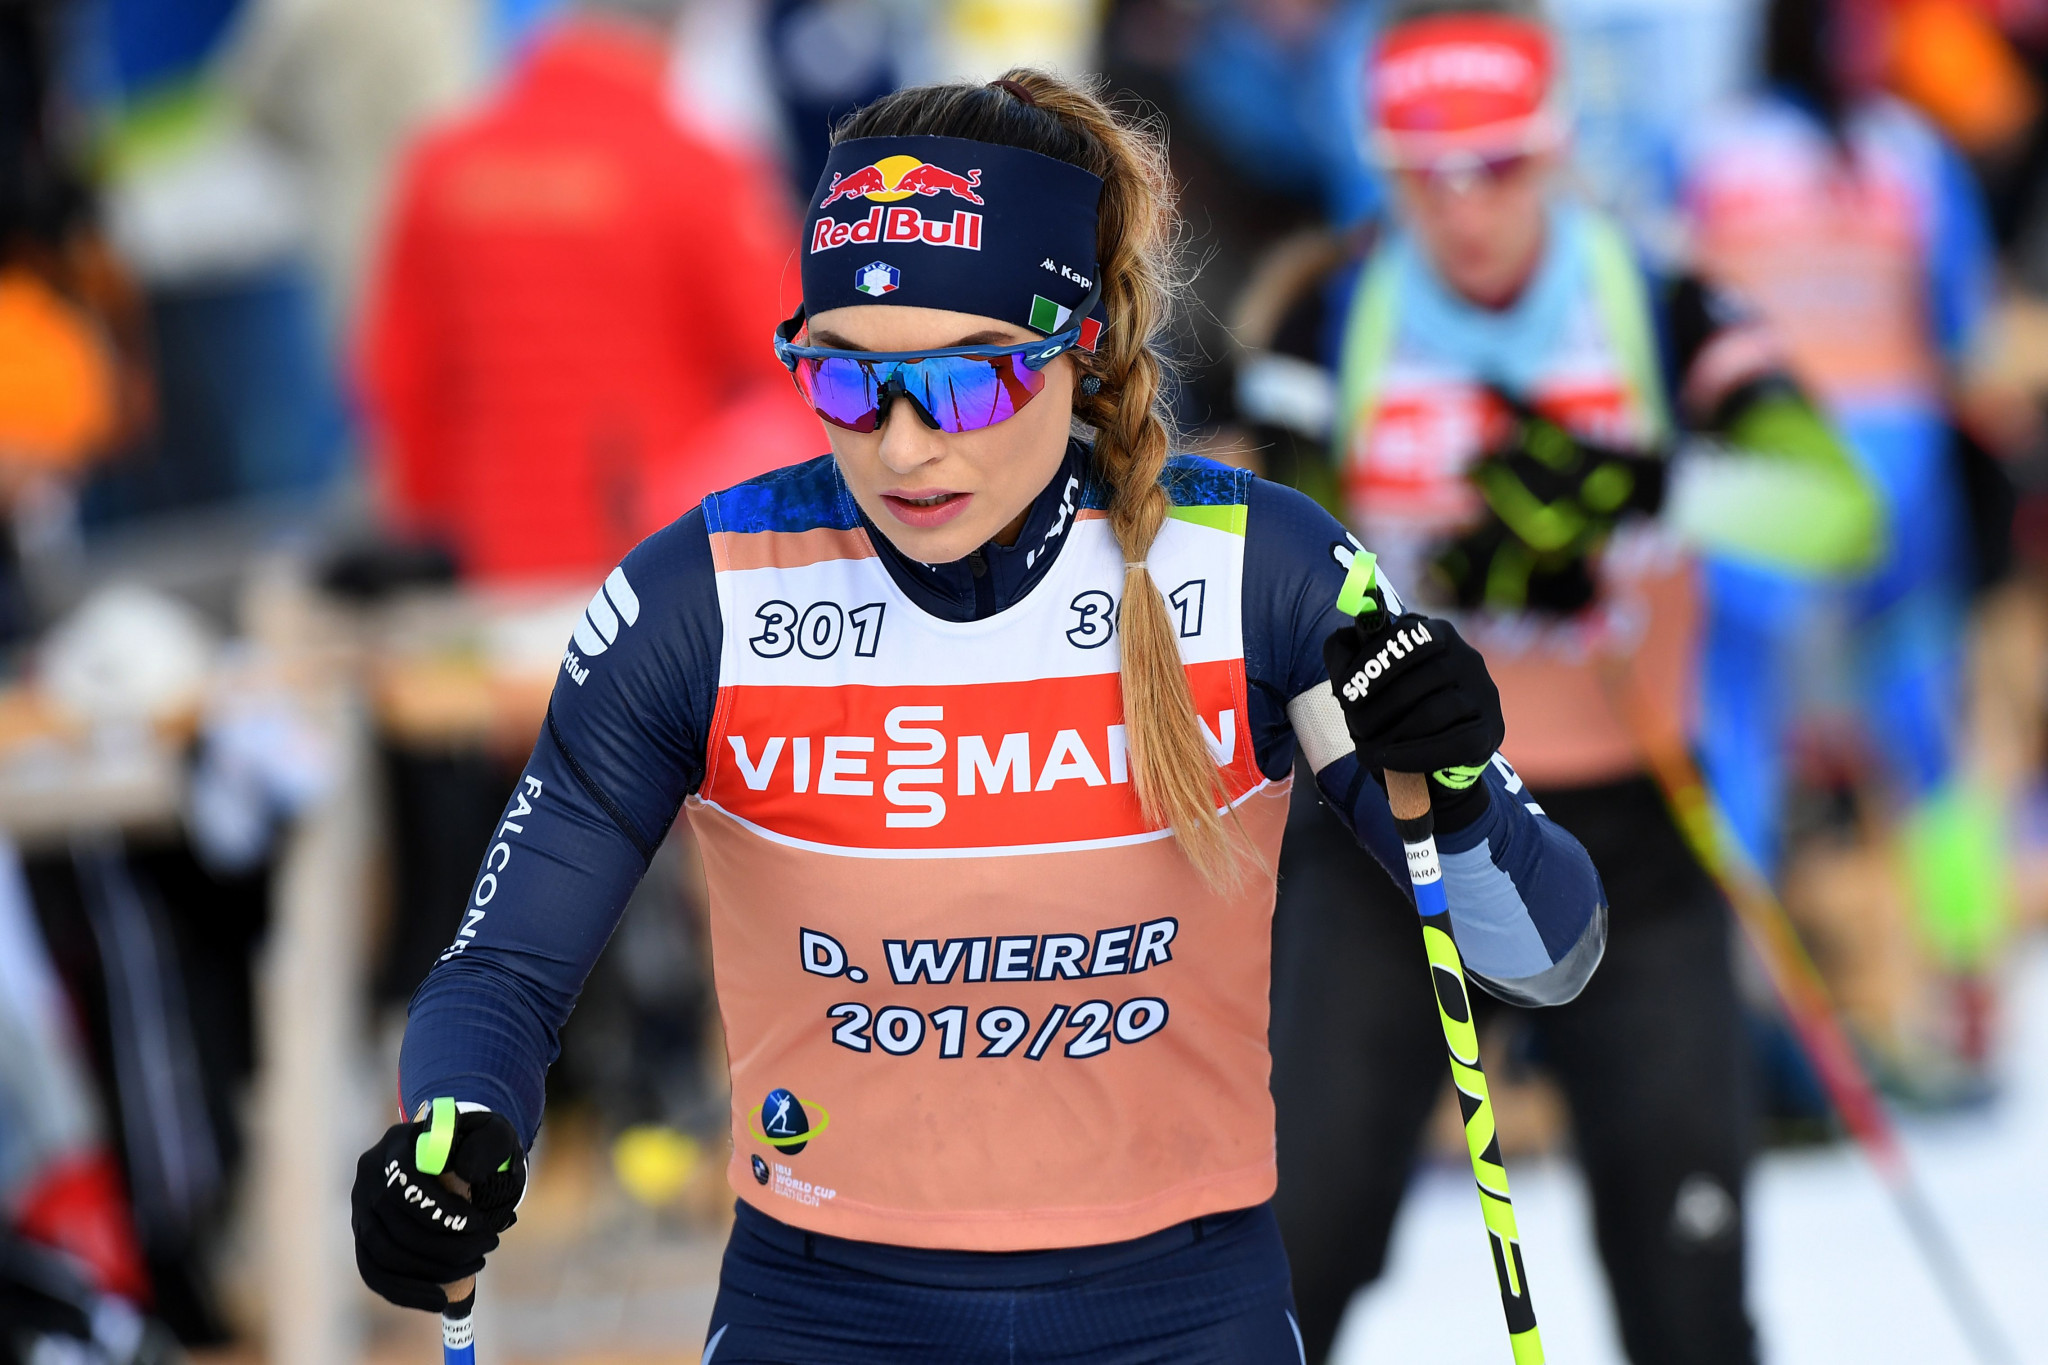 Dorothea Wierer of Italy finished the women's sprint in 22nd place ©Getty Images